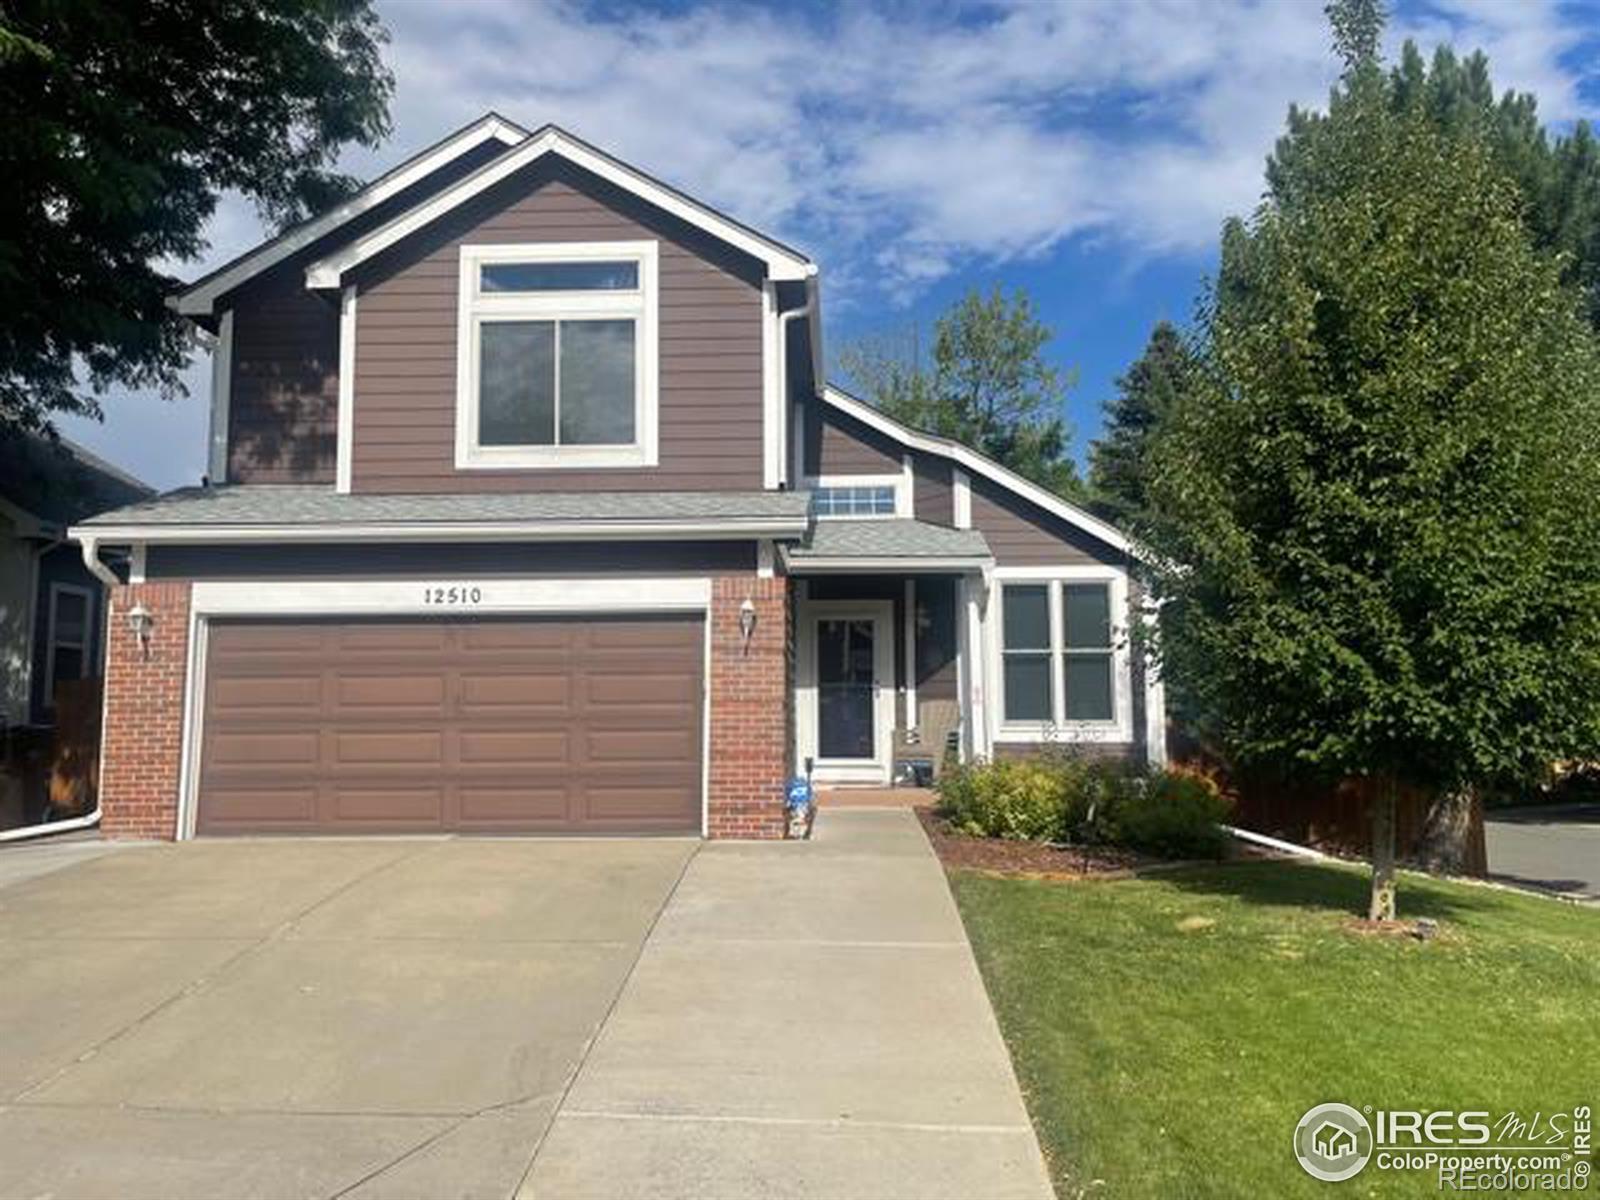 12510  Forest View Street, broomfield MLS: 123456789992644 Beds: 4 Baths: 4 Price: $607,000